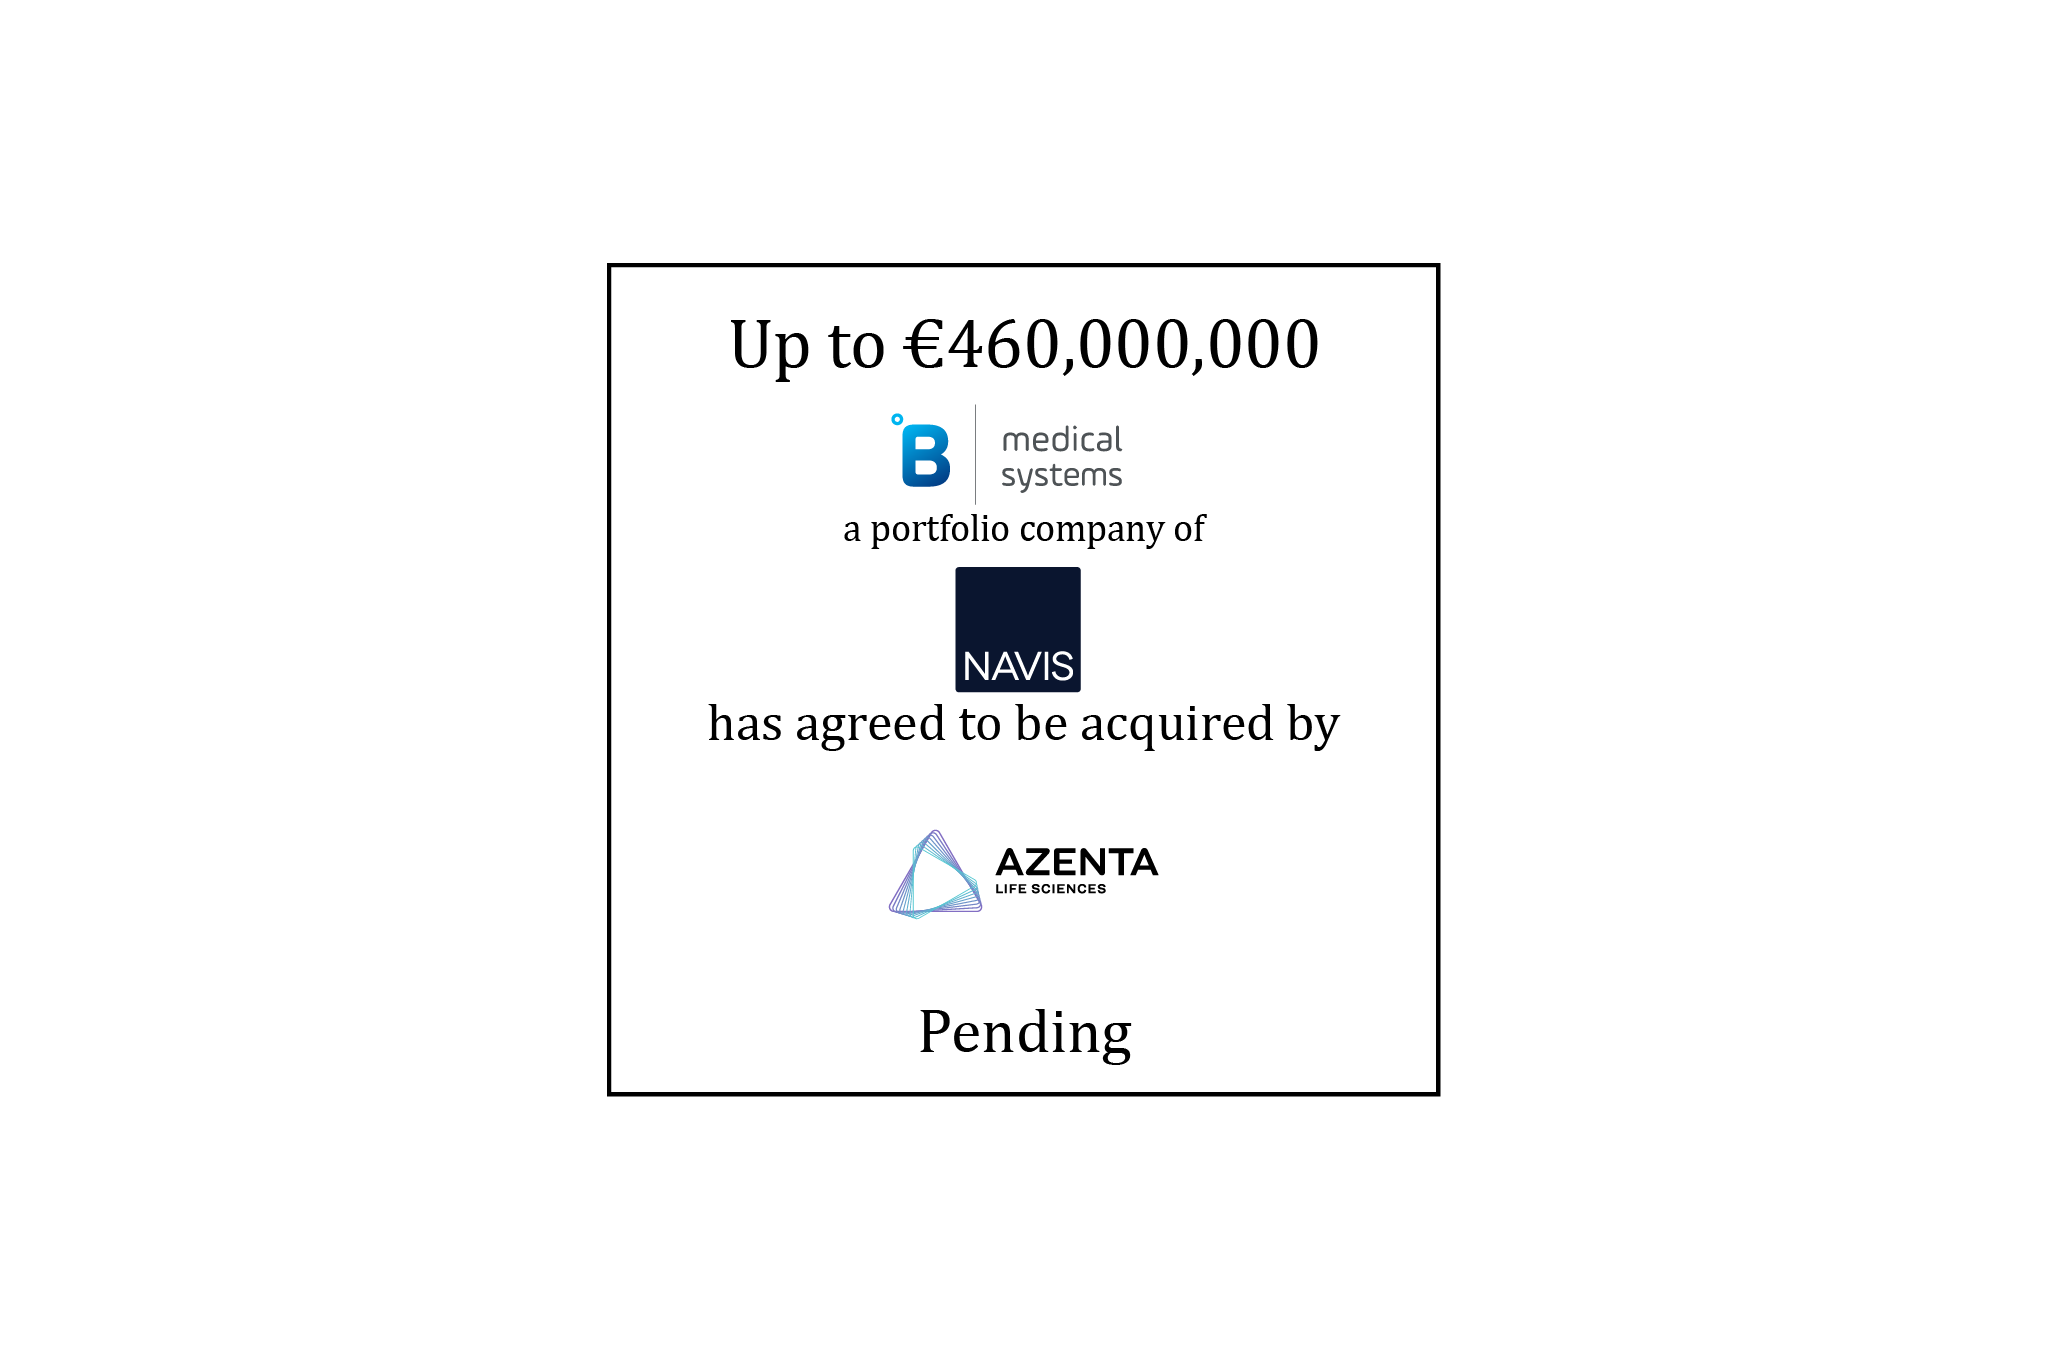 Up to €460,000,000 | B Medical Systems (logo), a portfolio company of Navis, has Agreed to be Acquired by Azenta (logo) | Pending